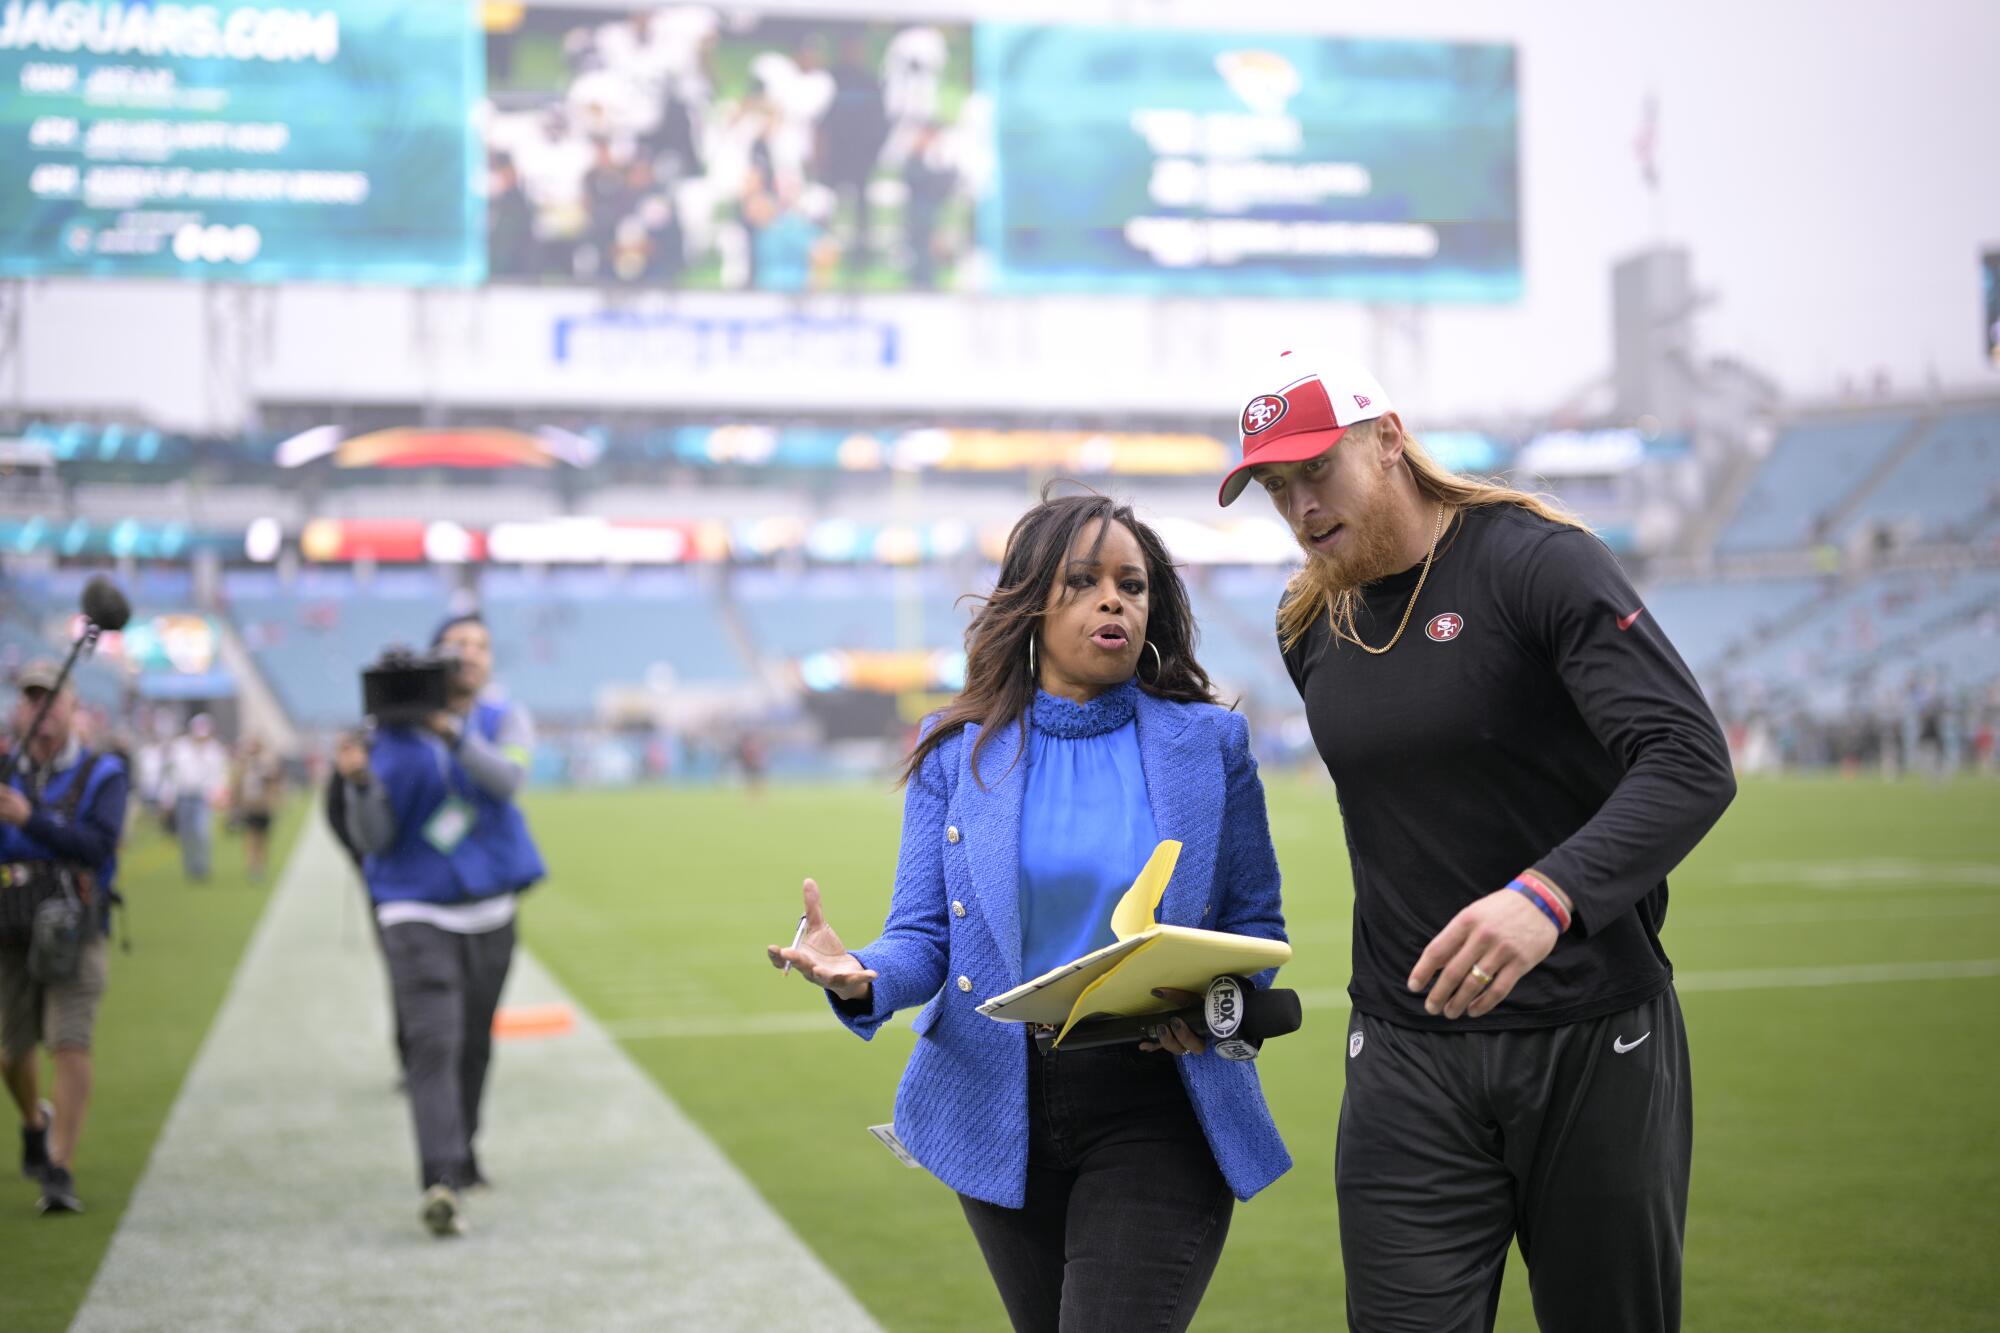 San Francisco 49ers tight end George Kittle, right, talks with Fox Sports sideline reporter Pam Oliver before a game.